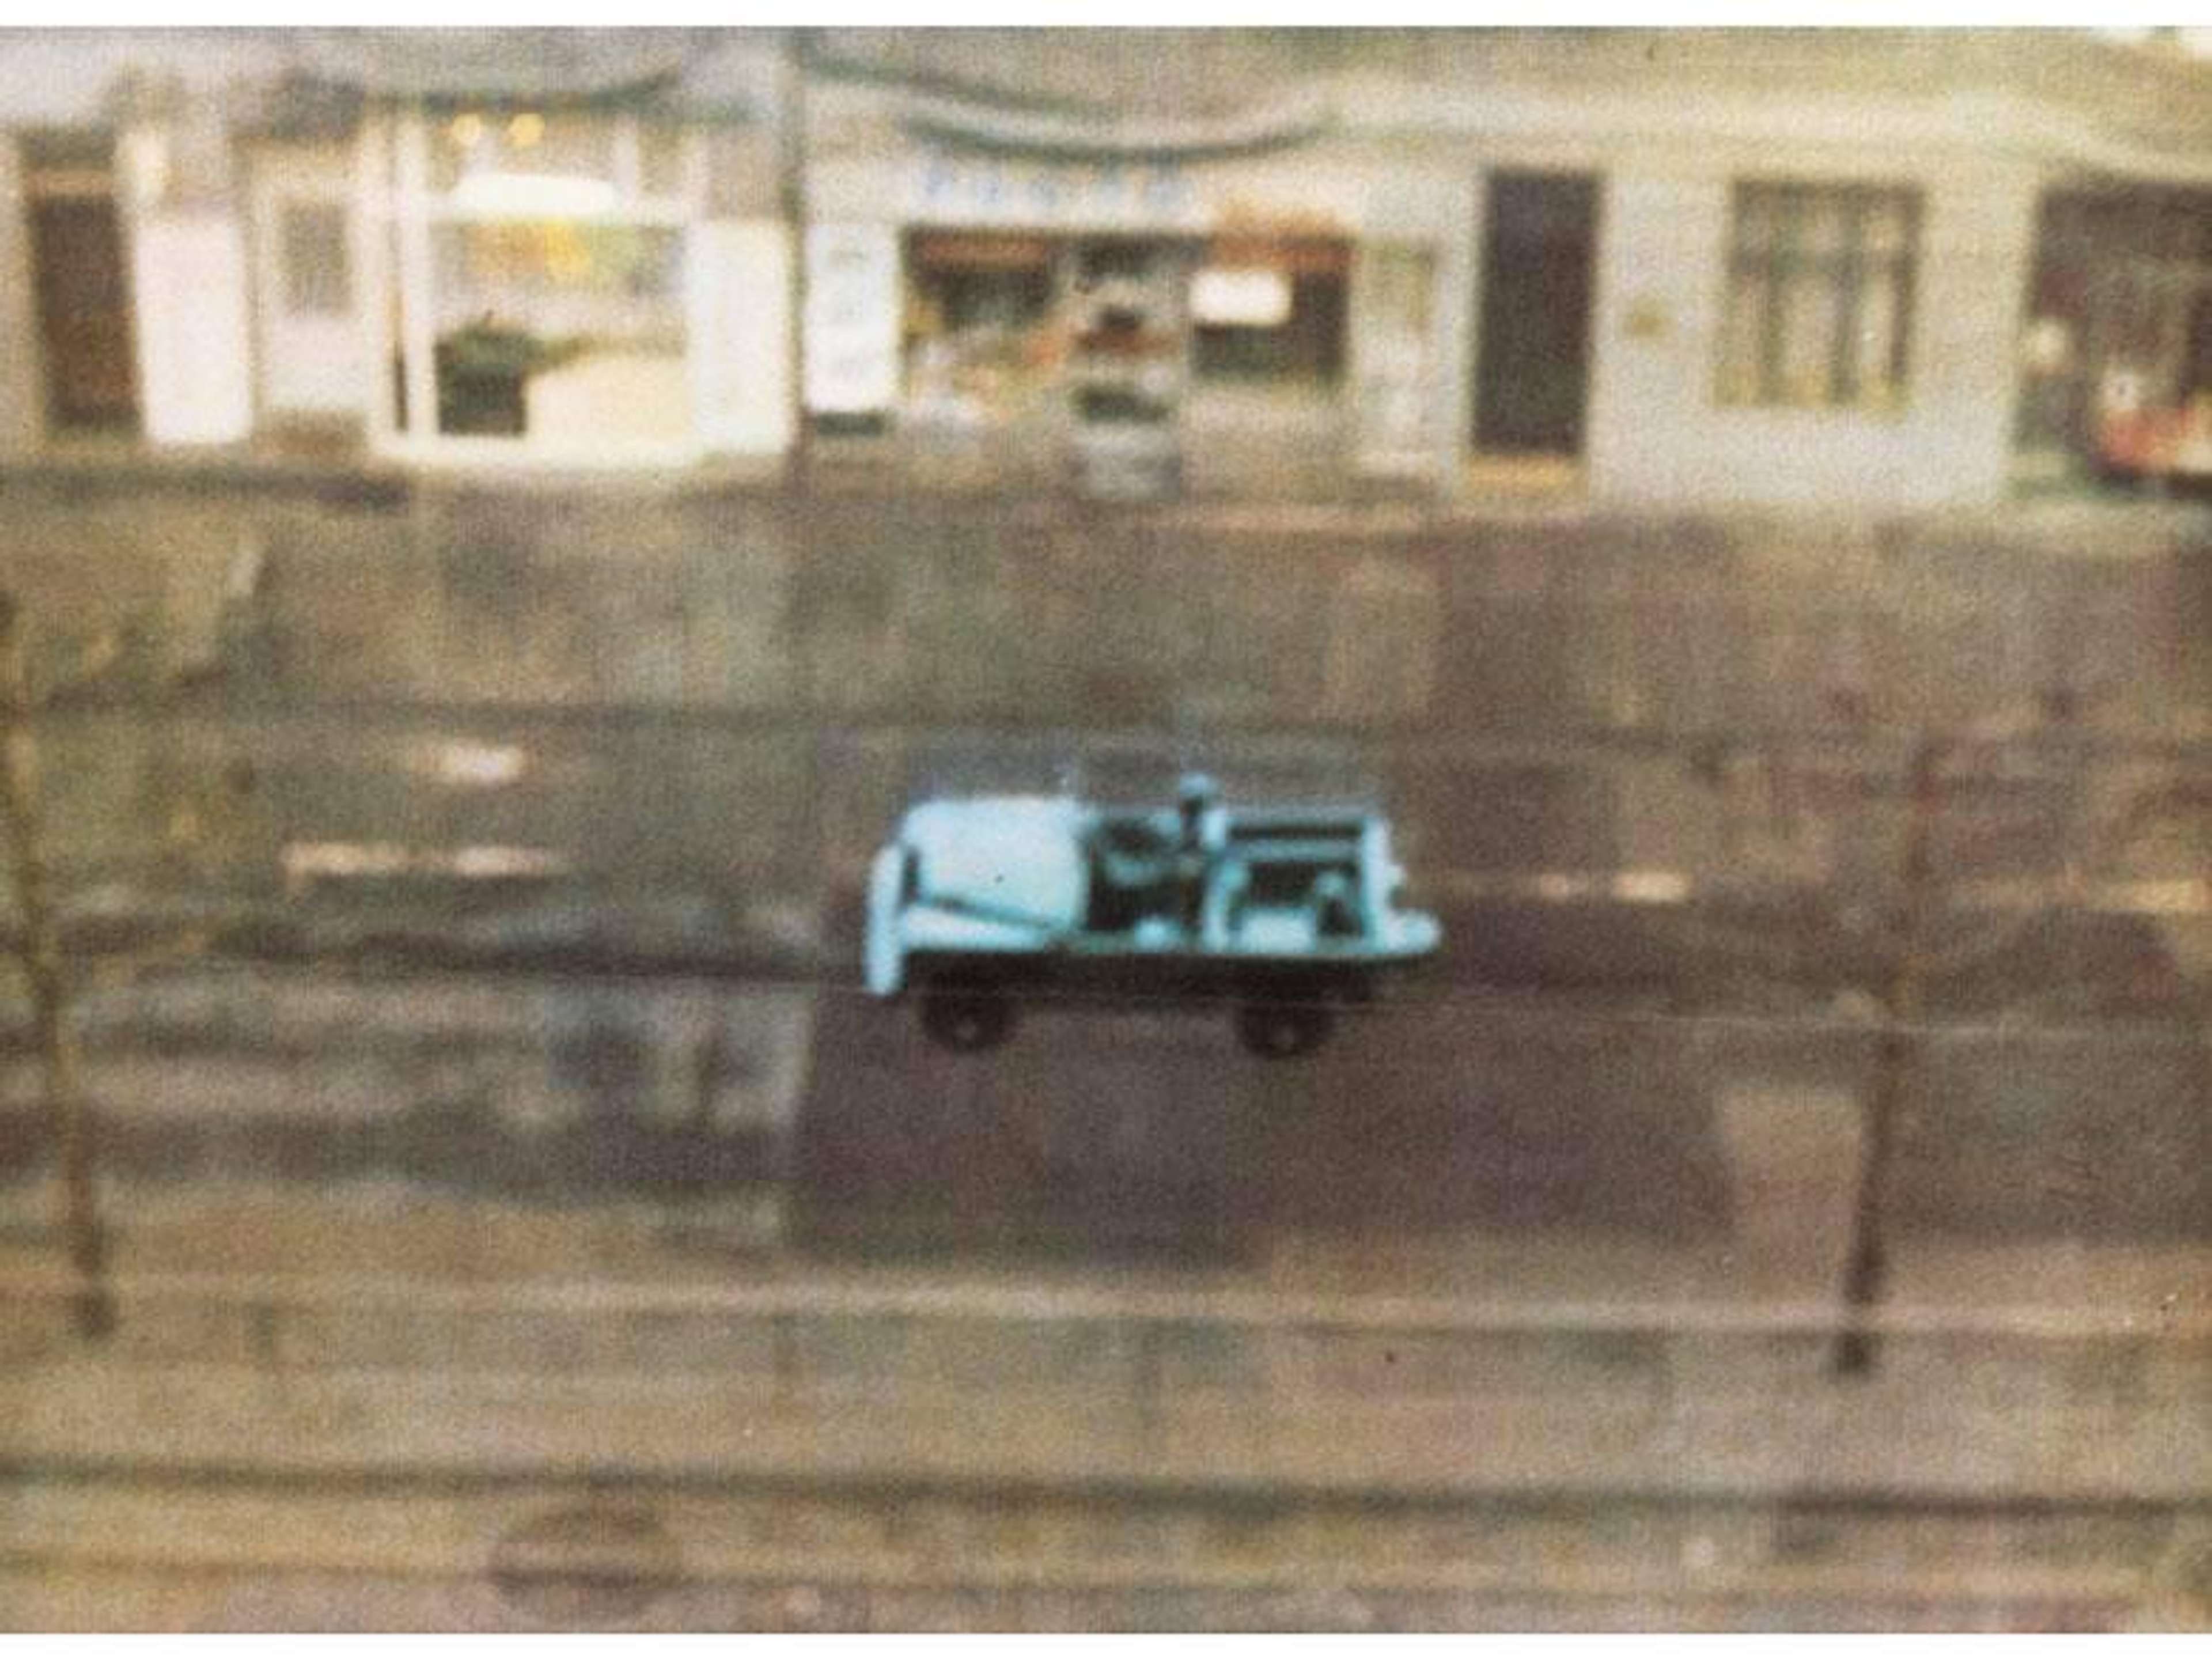 Blurry lithograph by Gerhard Richter, depicting a light blue car on the road. The Street is depicted in muted brown and beige tones.